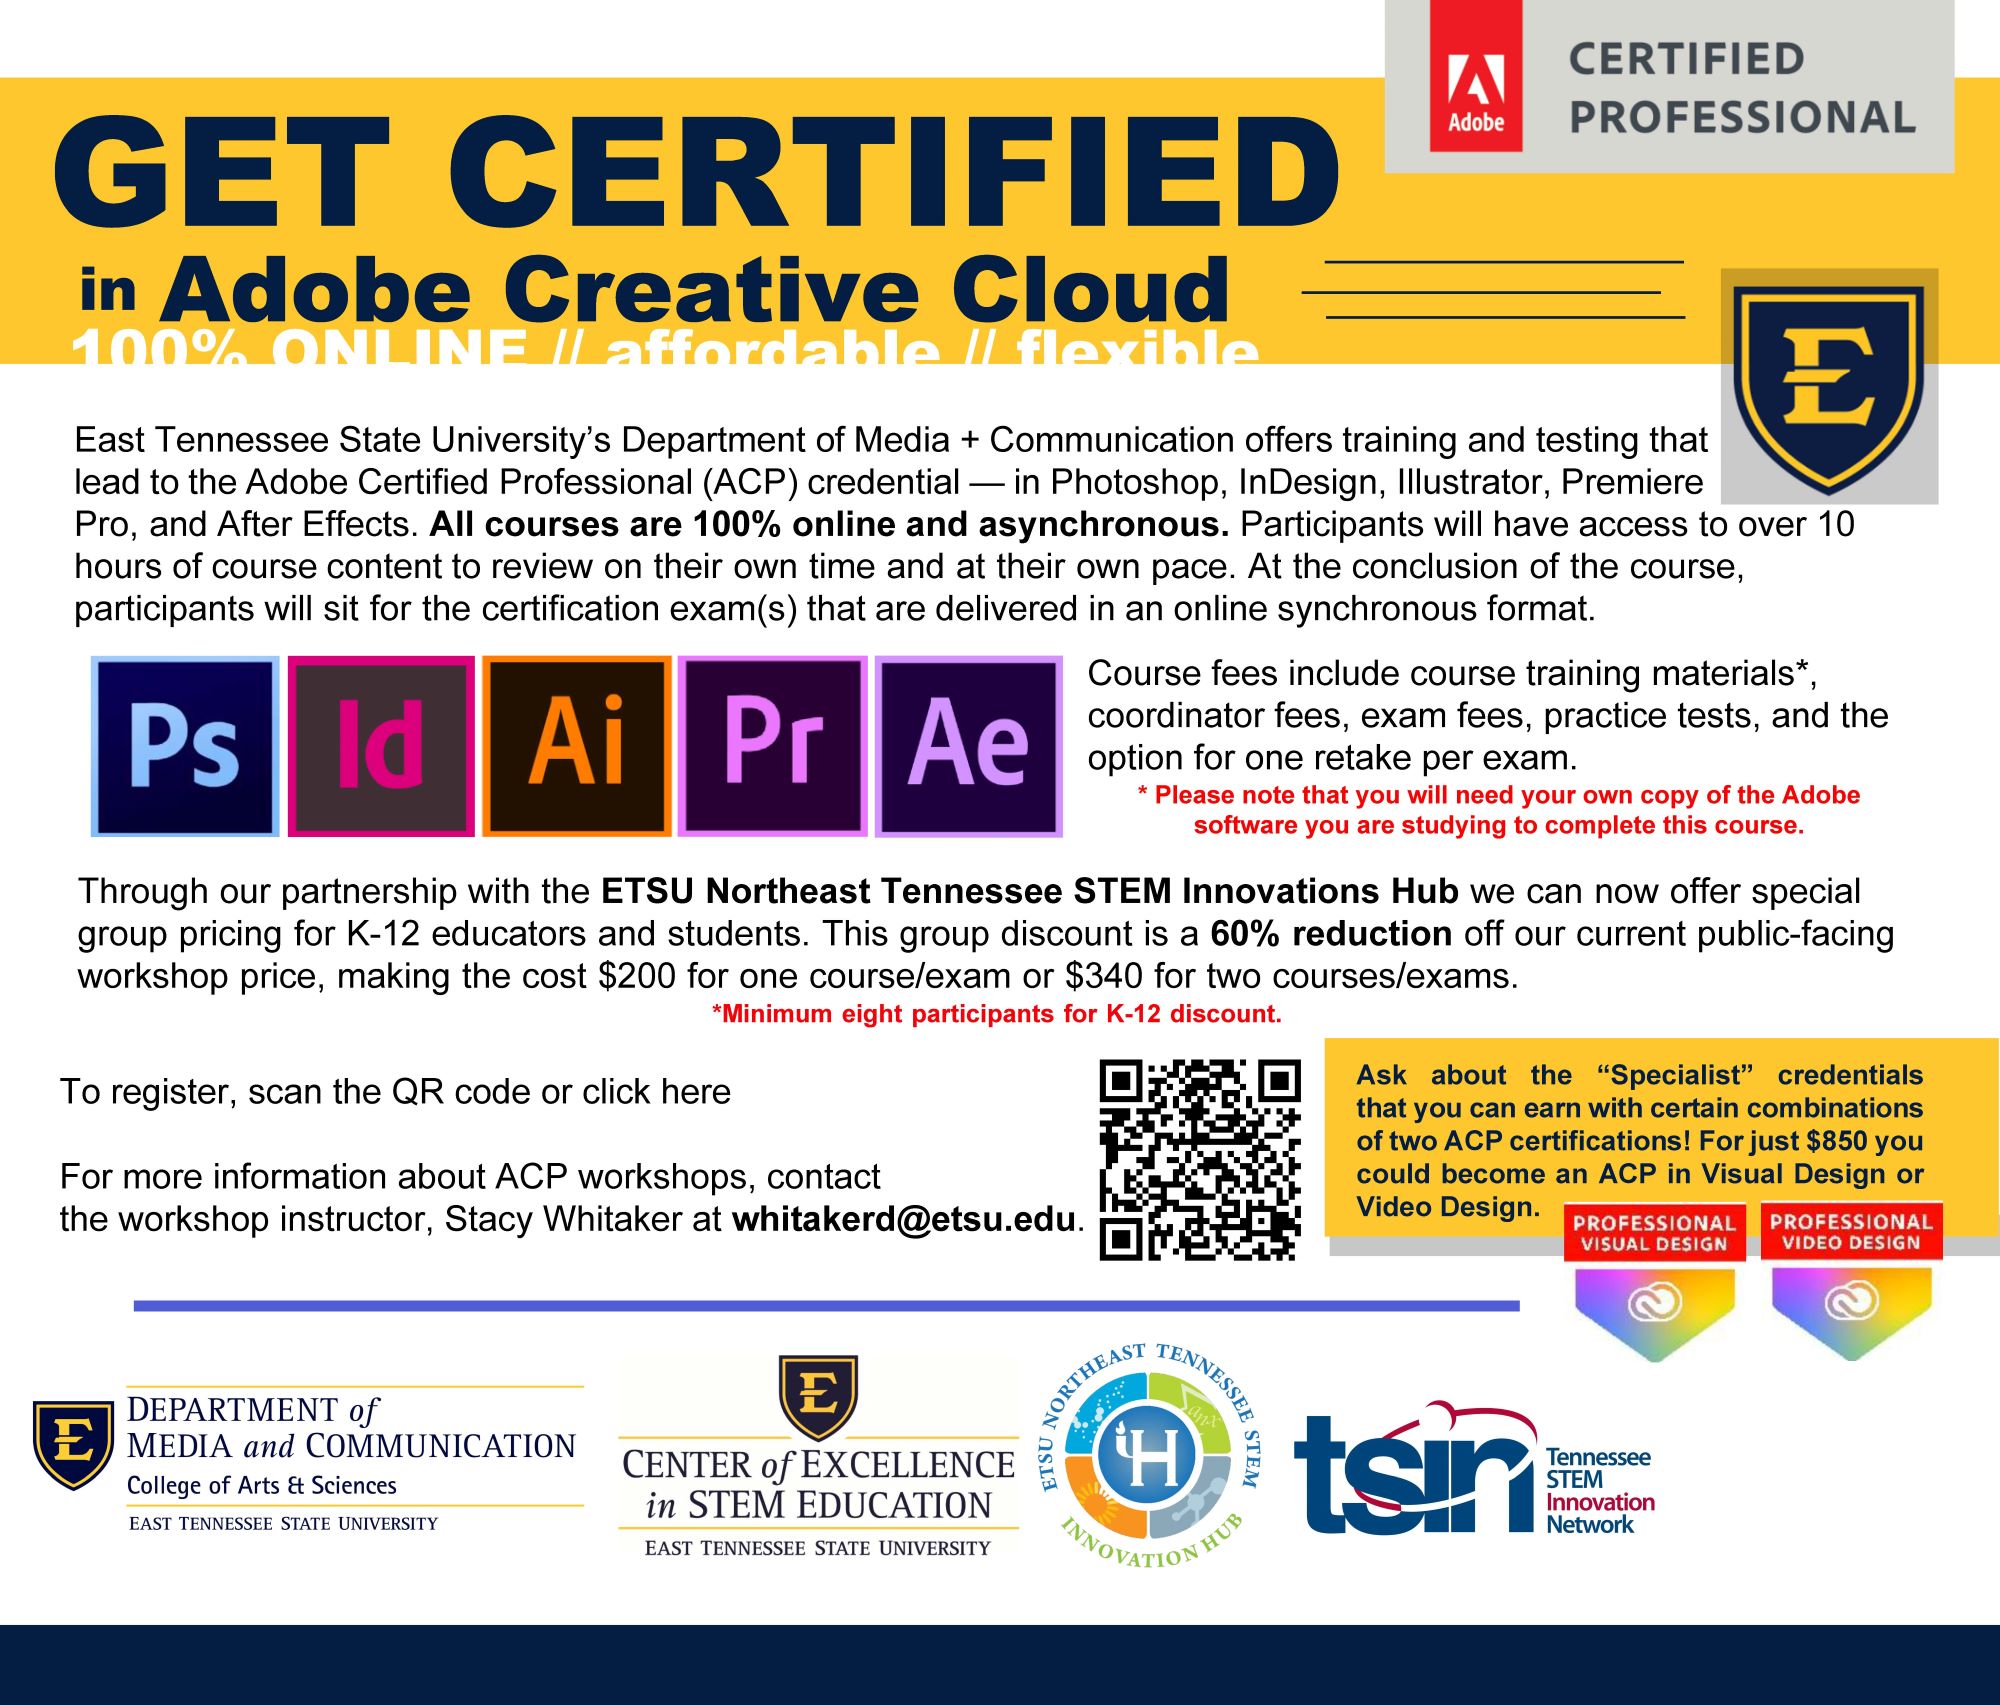 Check out these Adobe certification options!